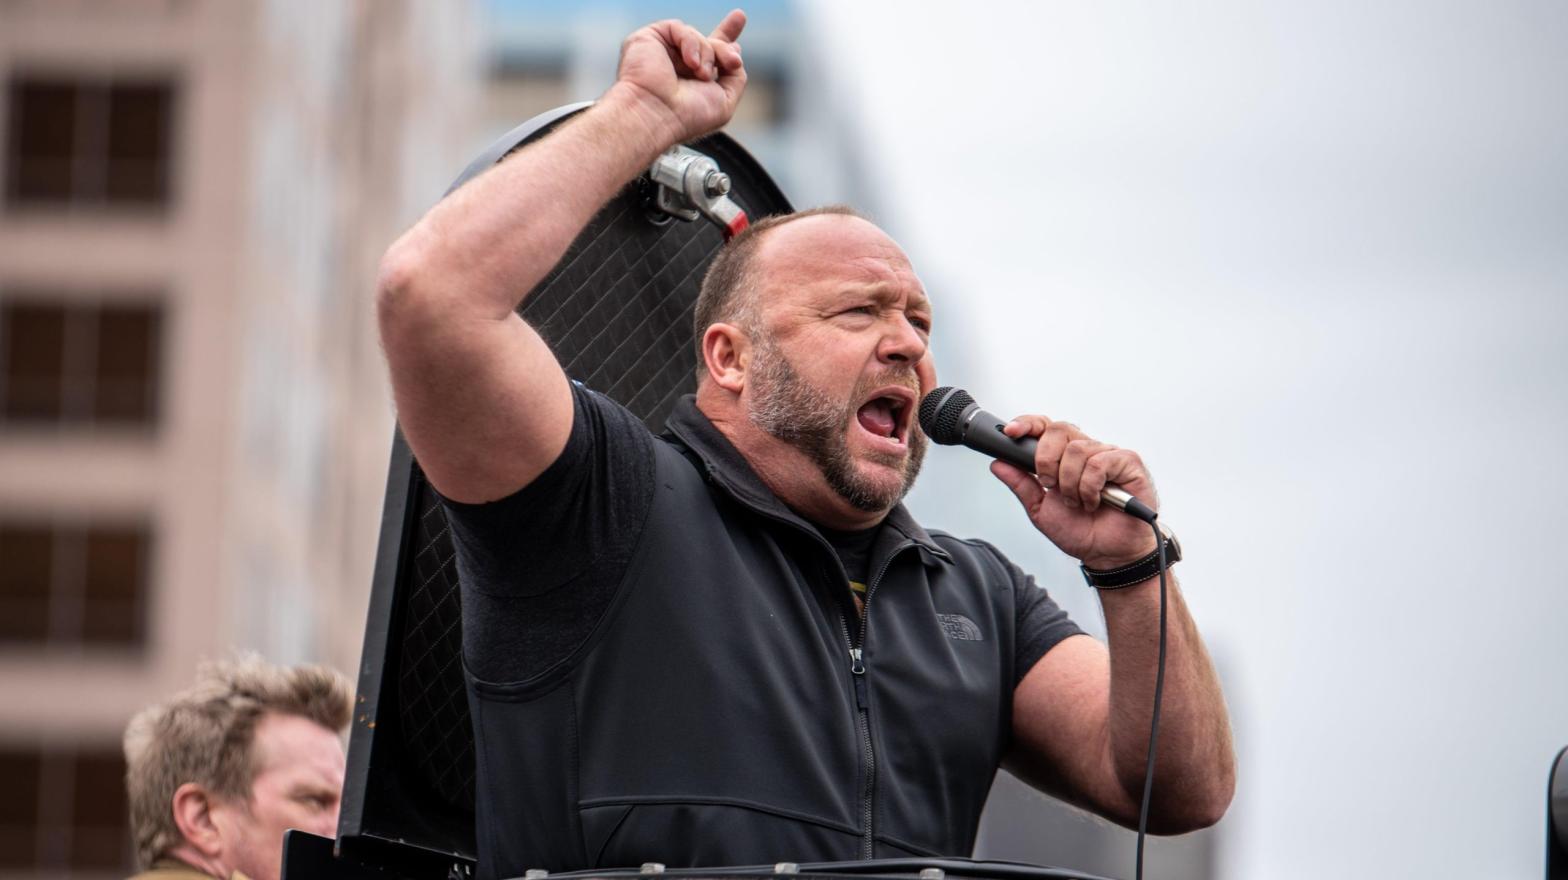 InfoWars host Alex Jones, seen at a rally against coronavirus lockdowns outside the Texas State Capital building in April 2020 in Austin, Texas. (Photo: Sergio Flores, Getty Images)